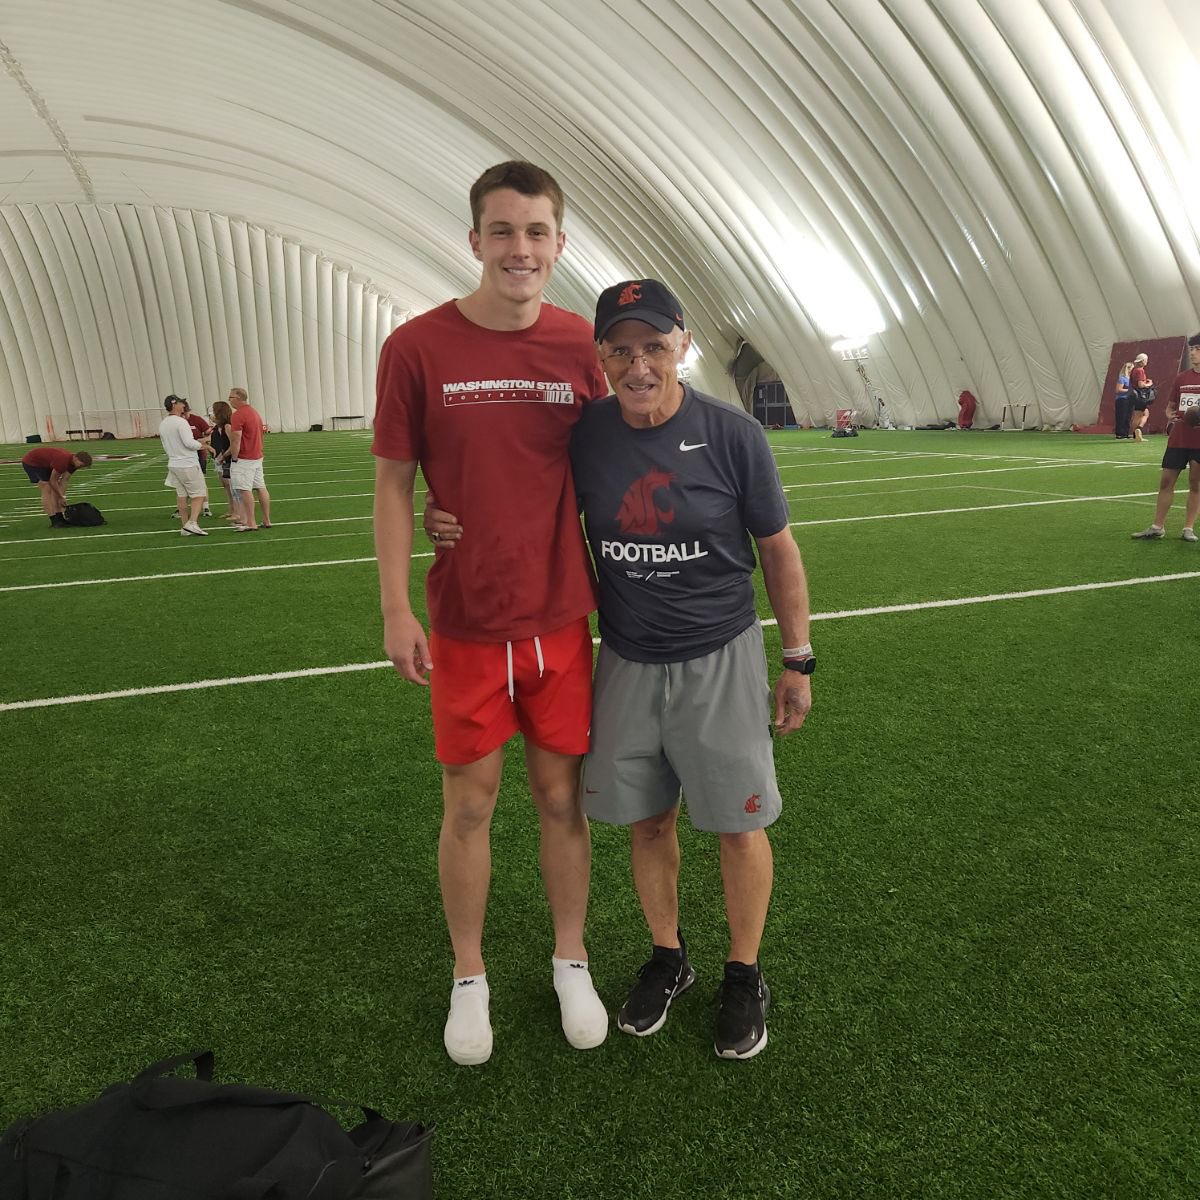 After a great workout and great conversation with @WhitworthN I am happy to say I have received an offer (PWO) from Washington State University! @CoachFerrigno @HKA_Tanalski @KohlsKicking @CoachDickert